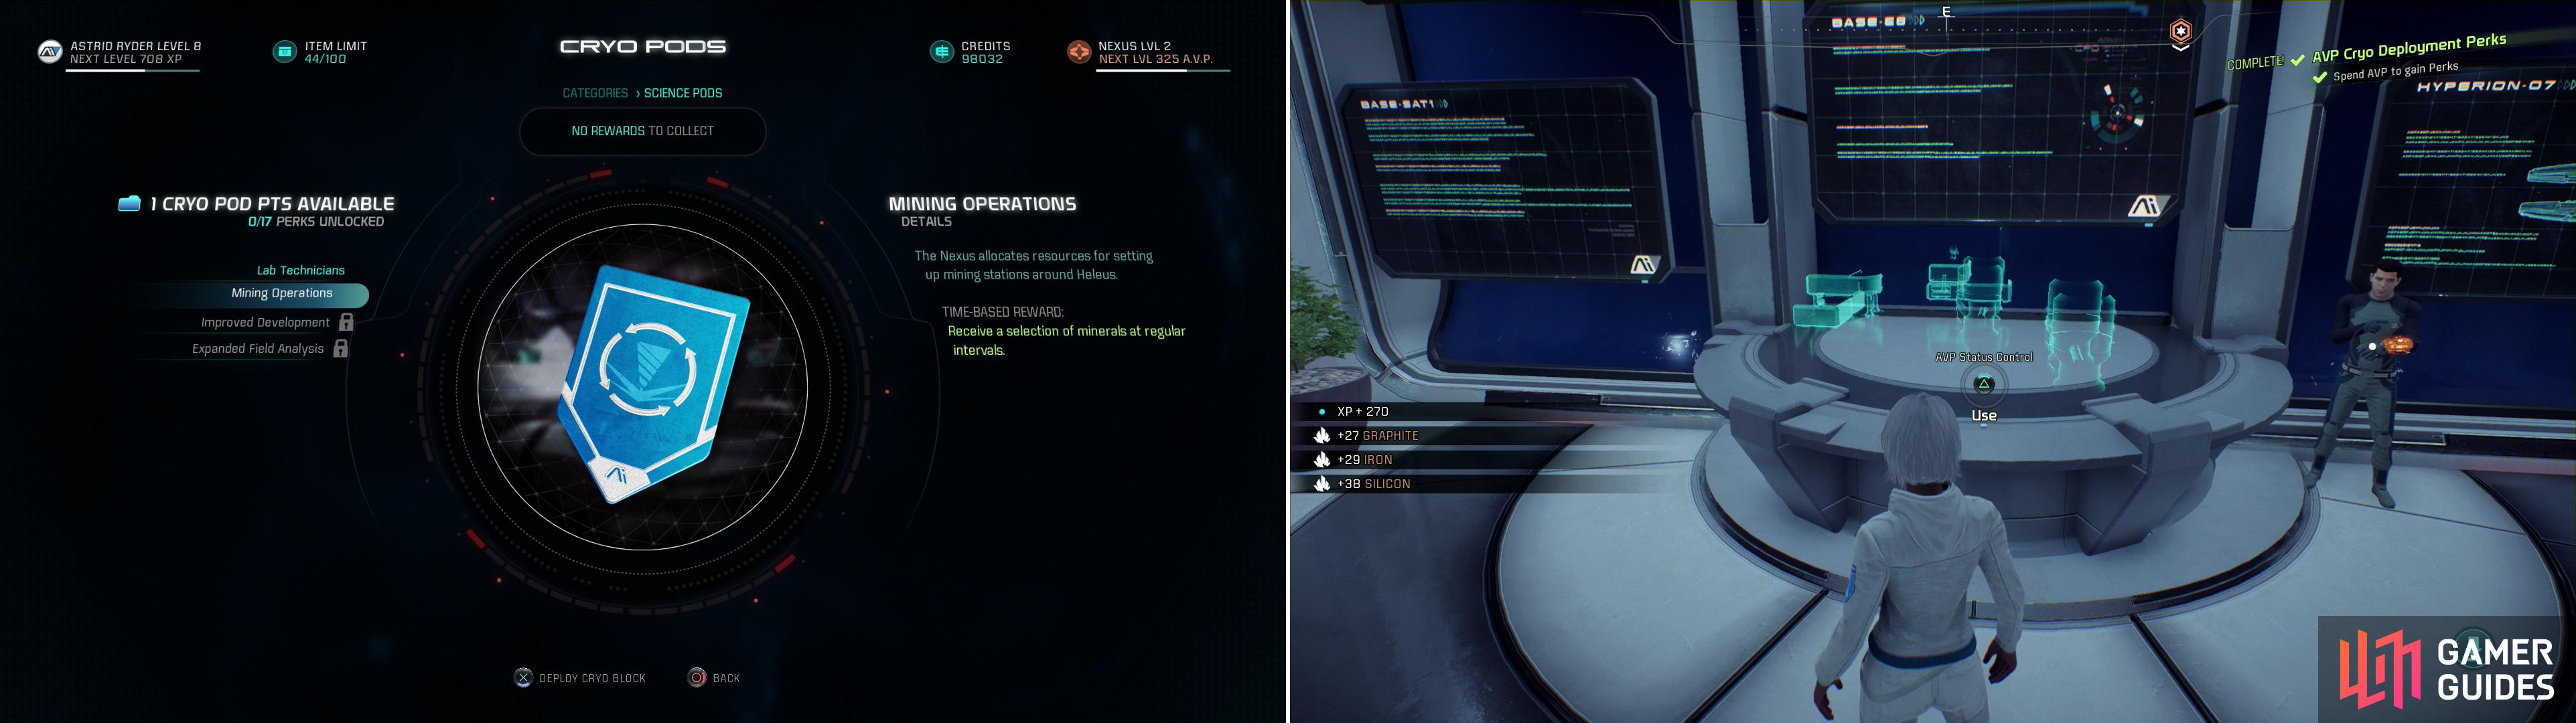 In the Cryo Pod menu you'll be able to spend your accumulated AVP perks (left) to unlock a variety of rewards (right).